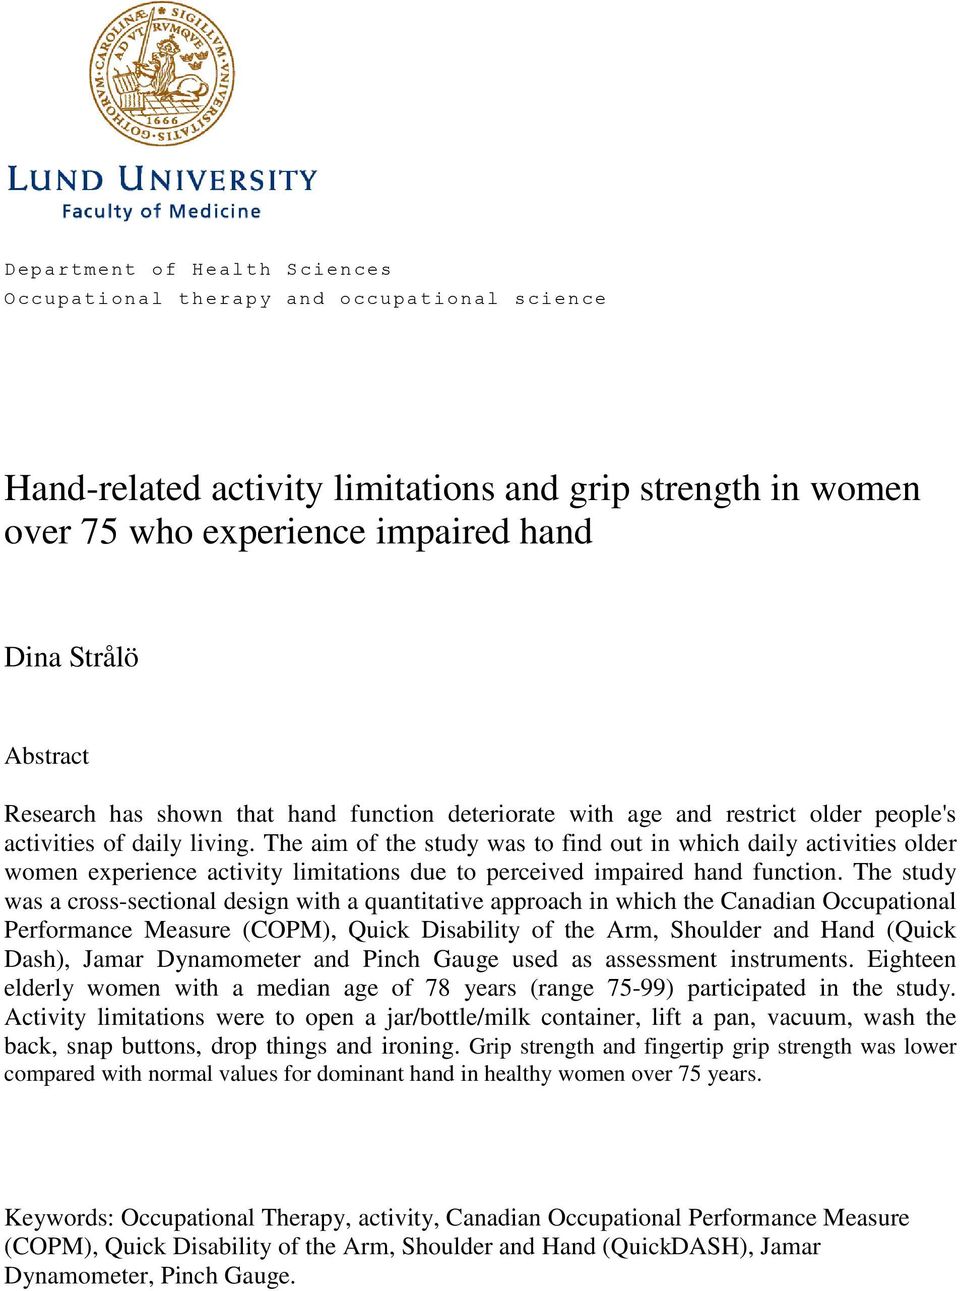 The aim of the study was to find out in which daily activities older women experience activity limitations due to perceived impaired hand function.